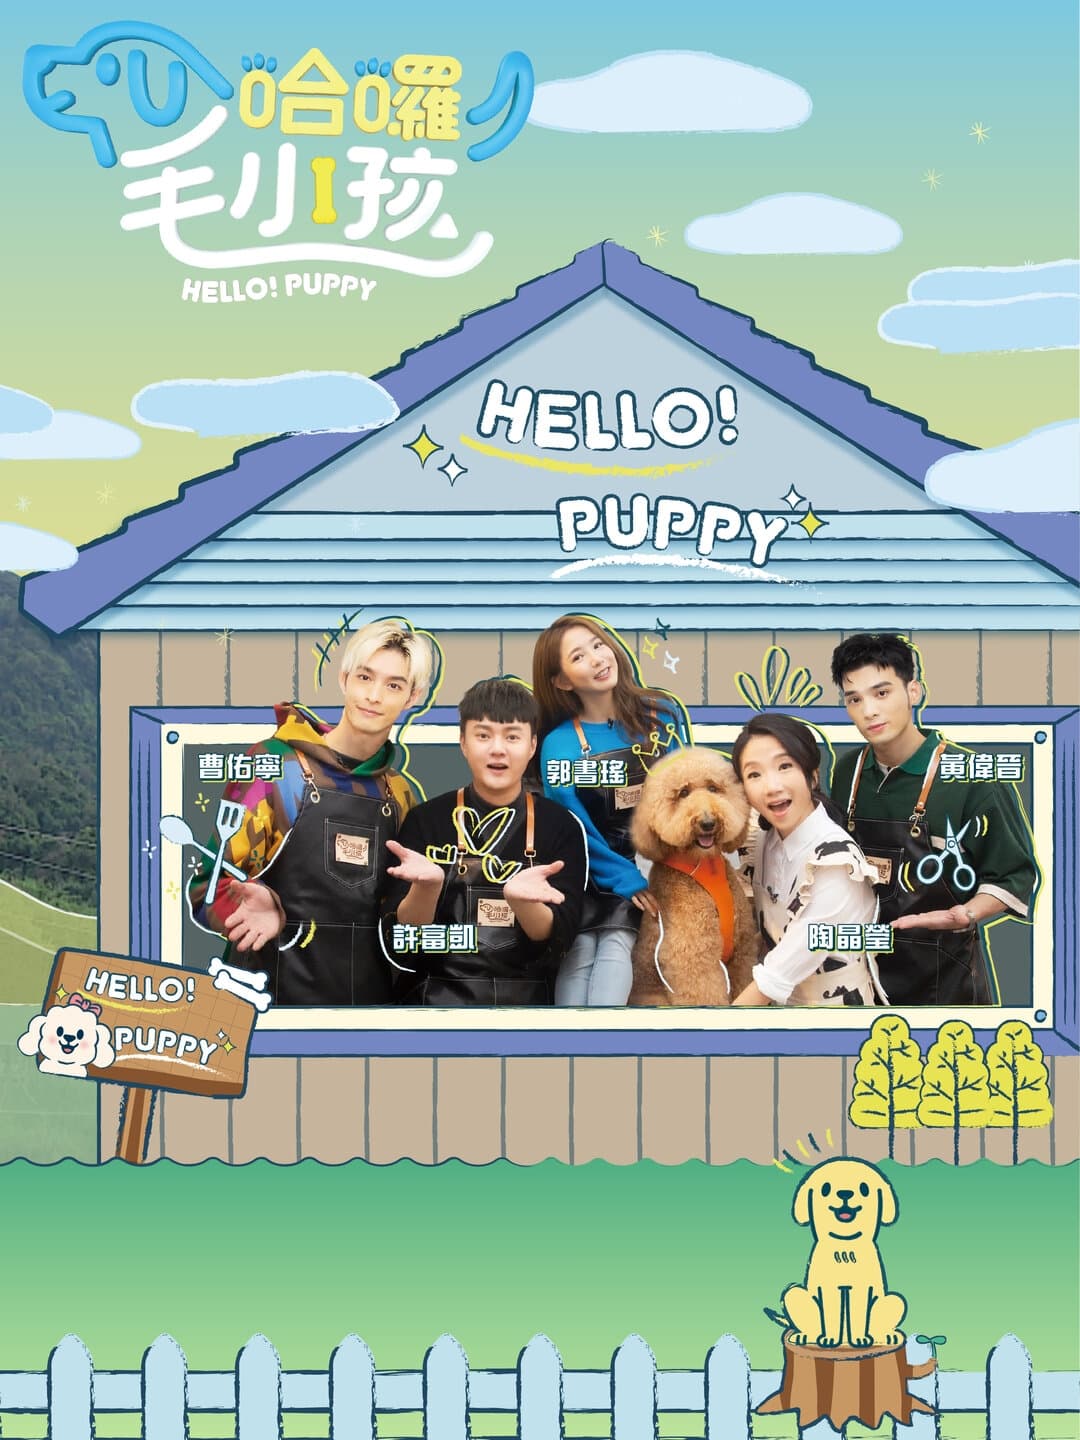 TV ratings for Hello! Puppy (哈囉！毛小孩) in the United States. TTV TV series